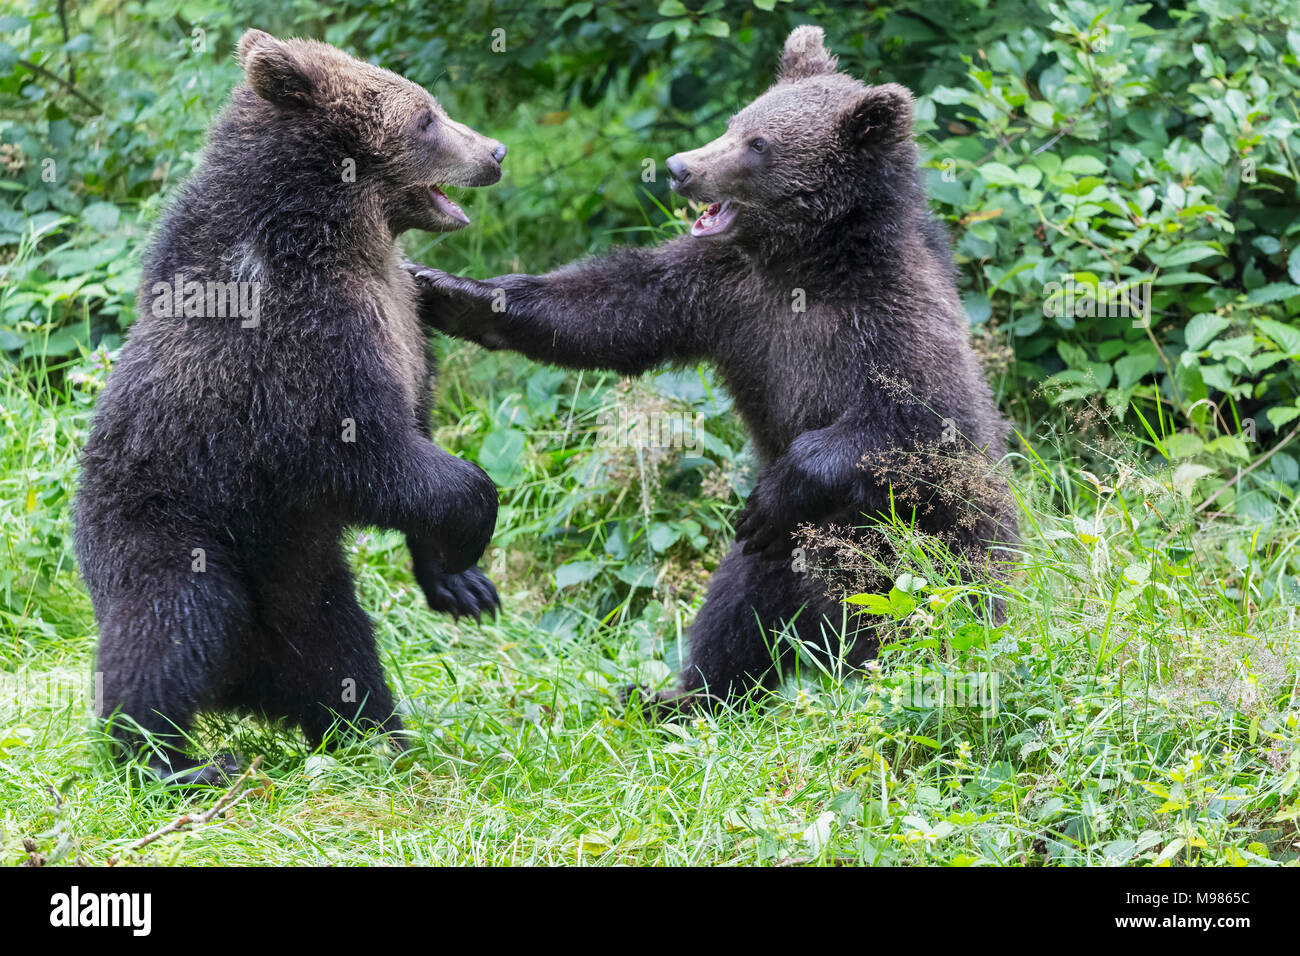 Germany, Bavarian Forest National Park, animal Open-air site Neuschoenau, brown bear, Ursus arctos, young animals playing Stock Photo